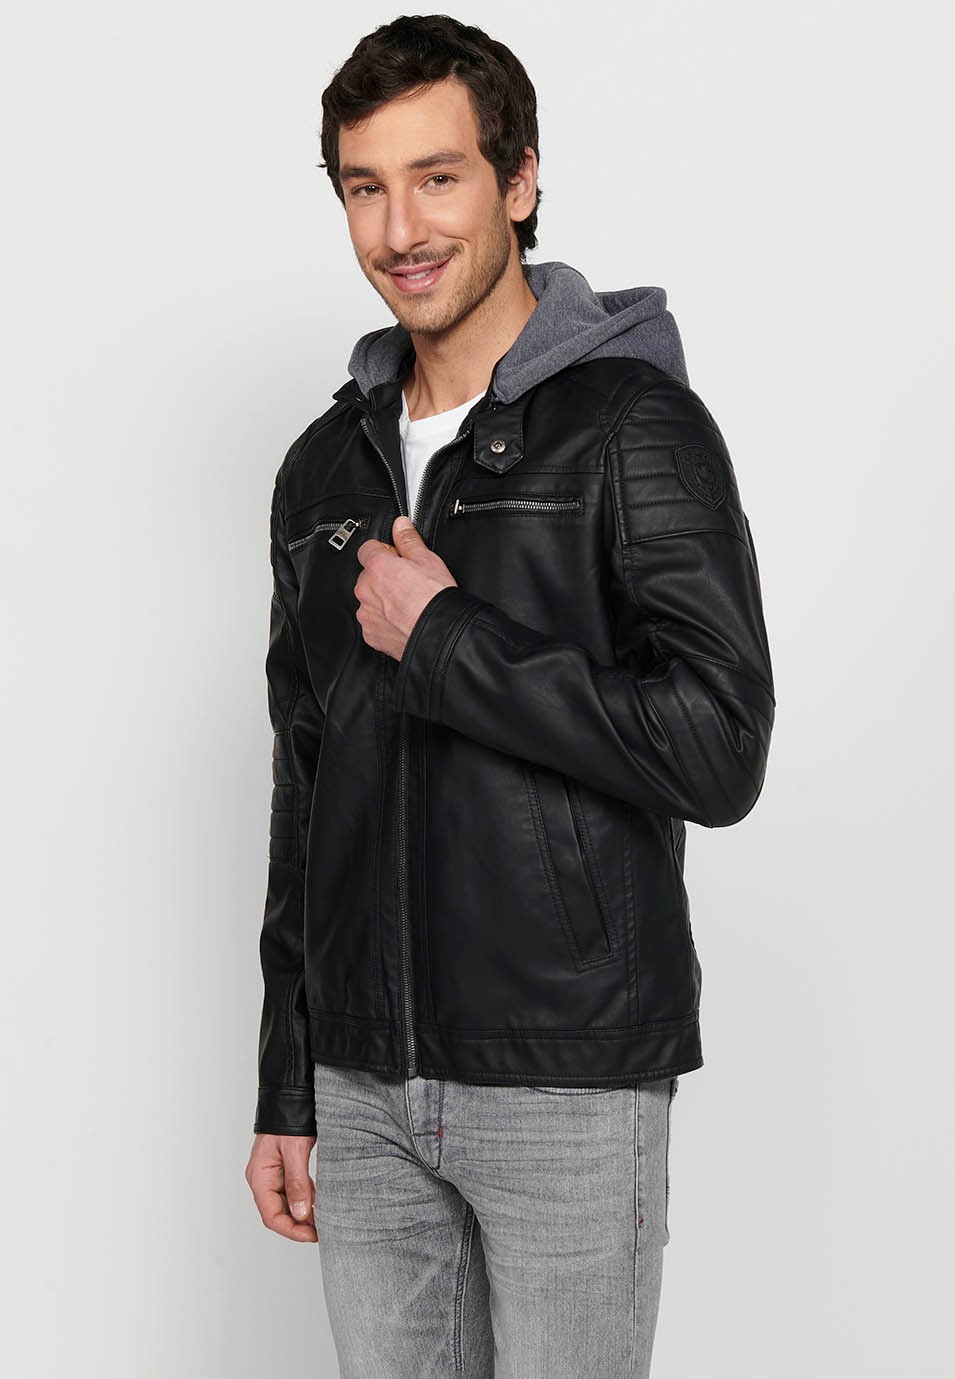 Long-sleeved windbreaker jacket with zipper front closure and adjustable detachable hooded collar with drawstring in Black for Men 3